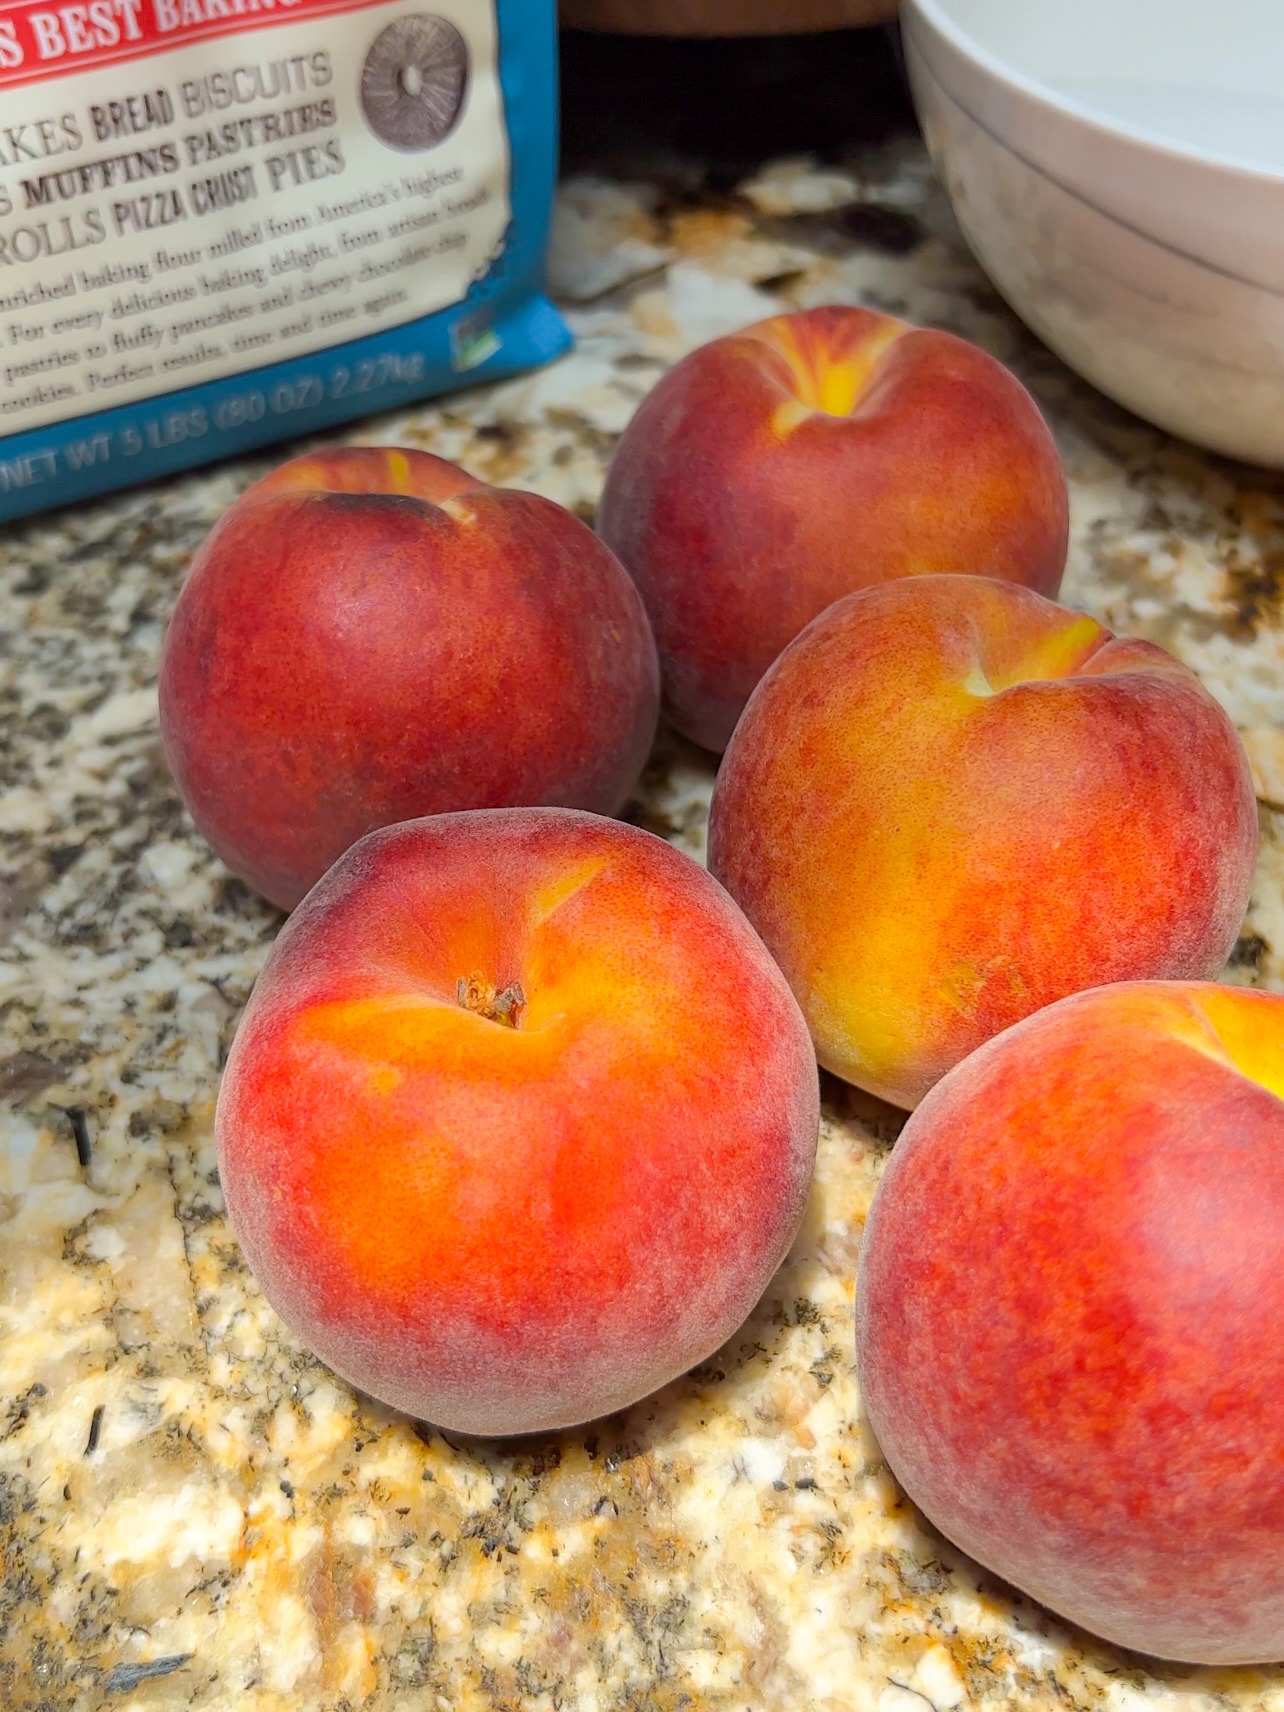 Peaches before peeling and removing the pit.